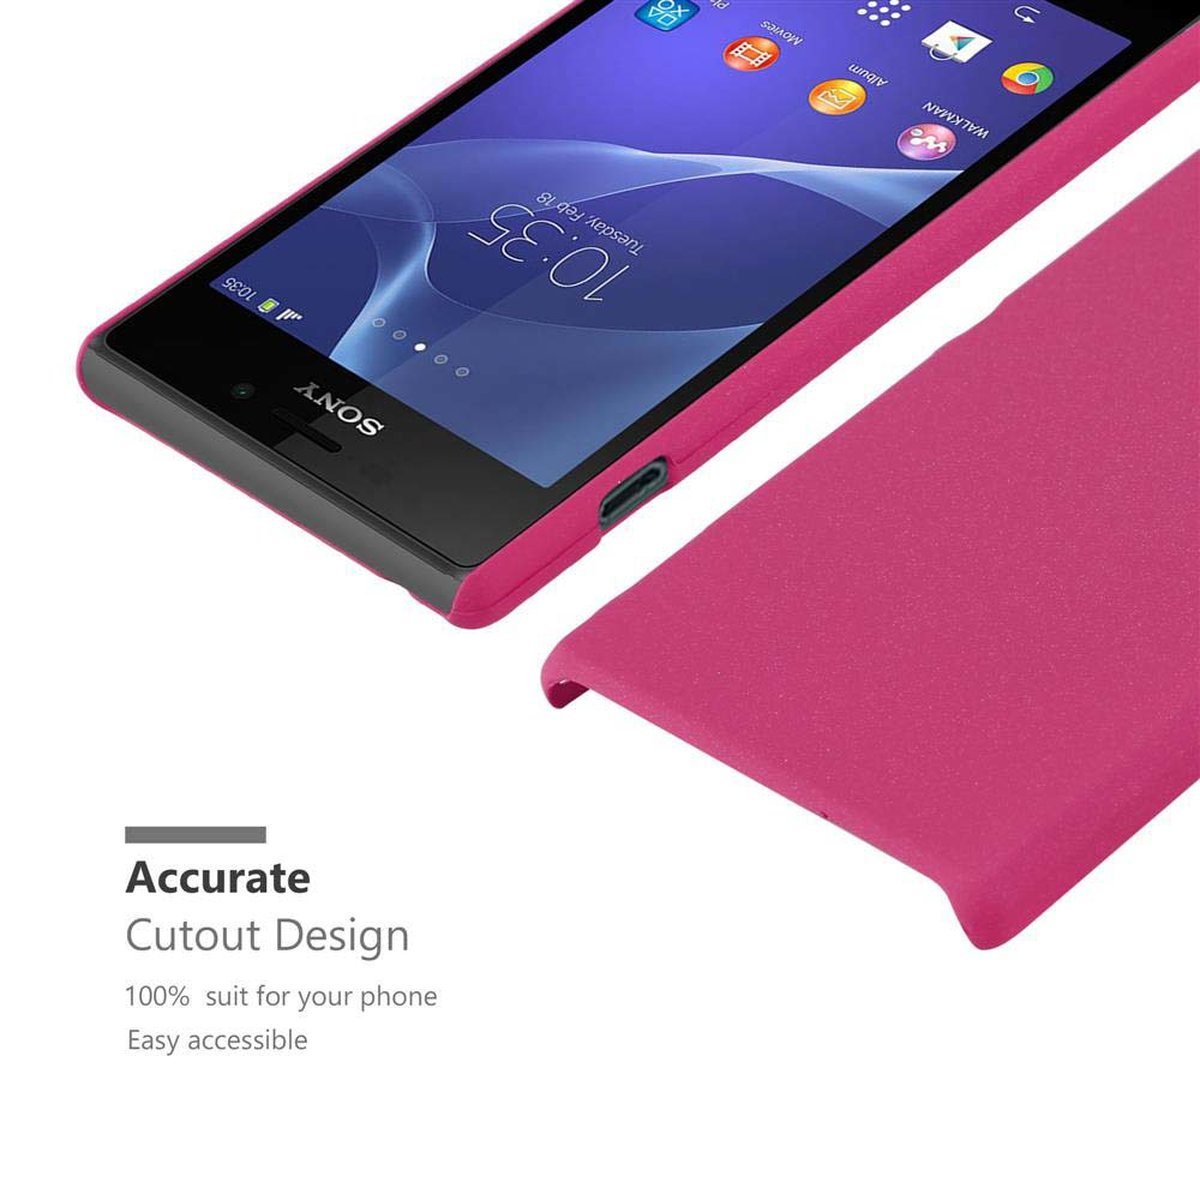 Style, im M2 Sony, Hülle FROSTY / Backcover, AQUA, PINK Xperia Frosty M2 Hard CADORABO Case